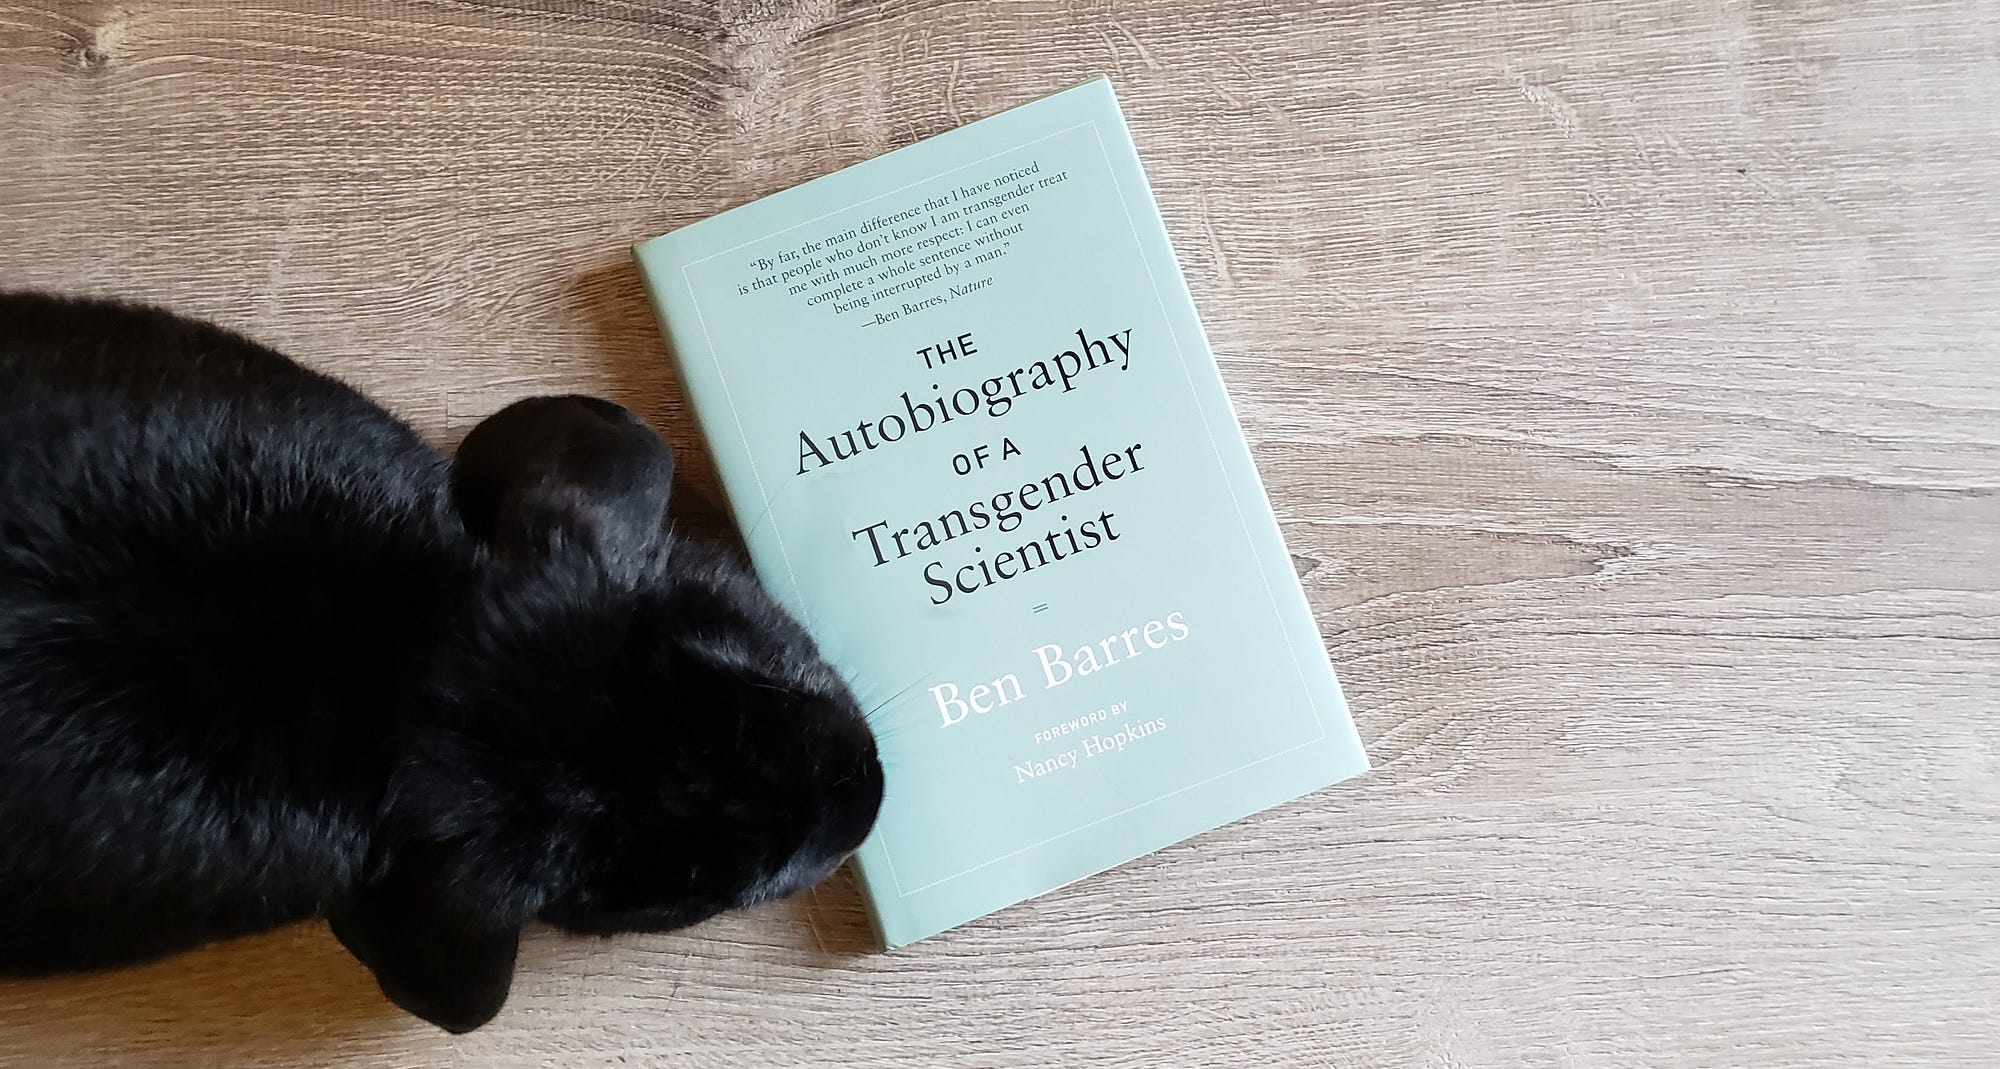 Ben Barres tells his story in his own words by Ashley Juavinett The Spike Medium